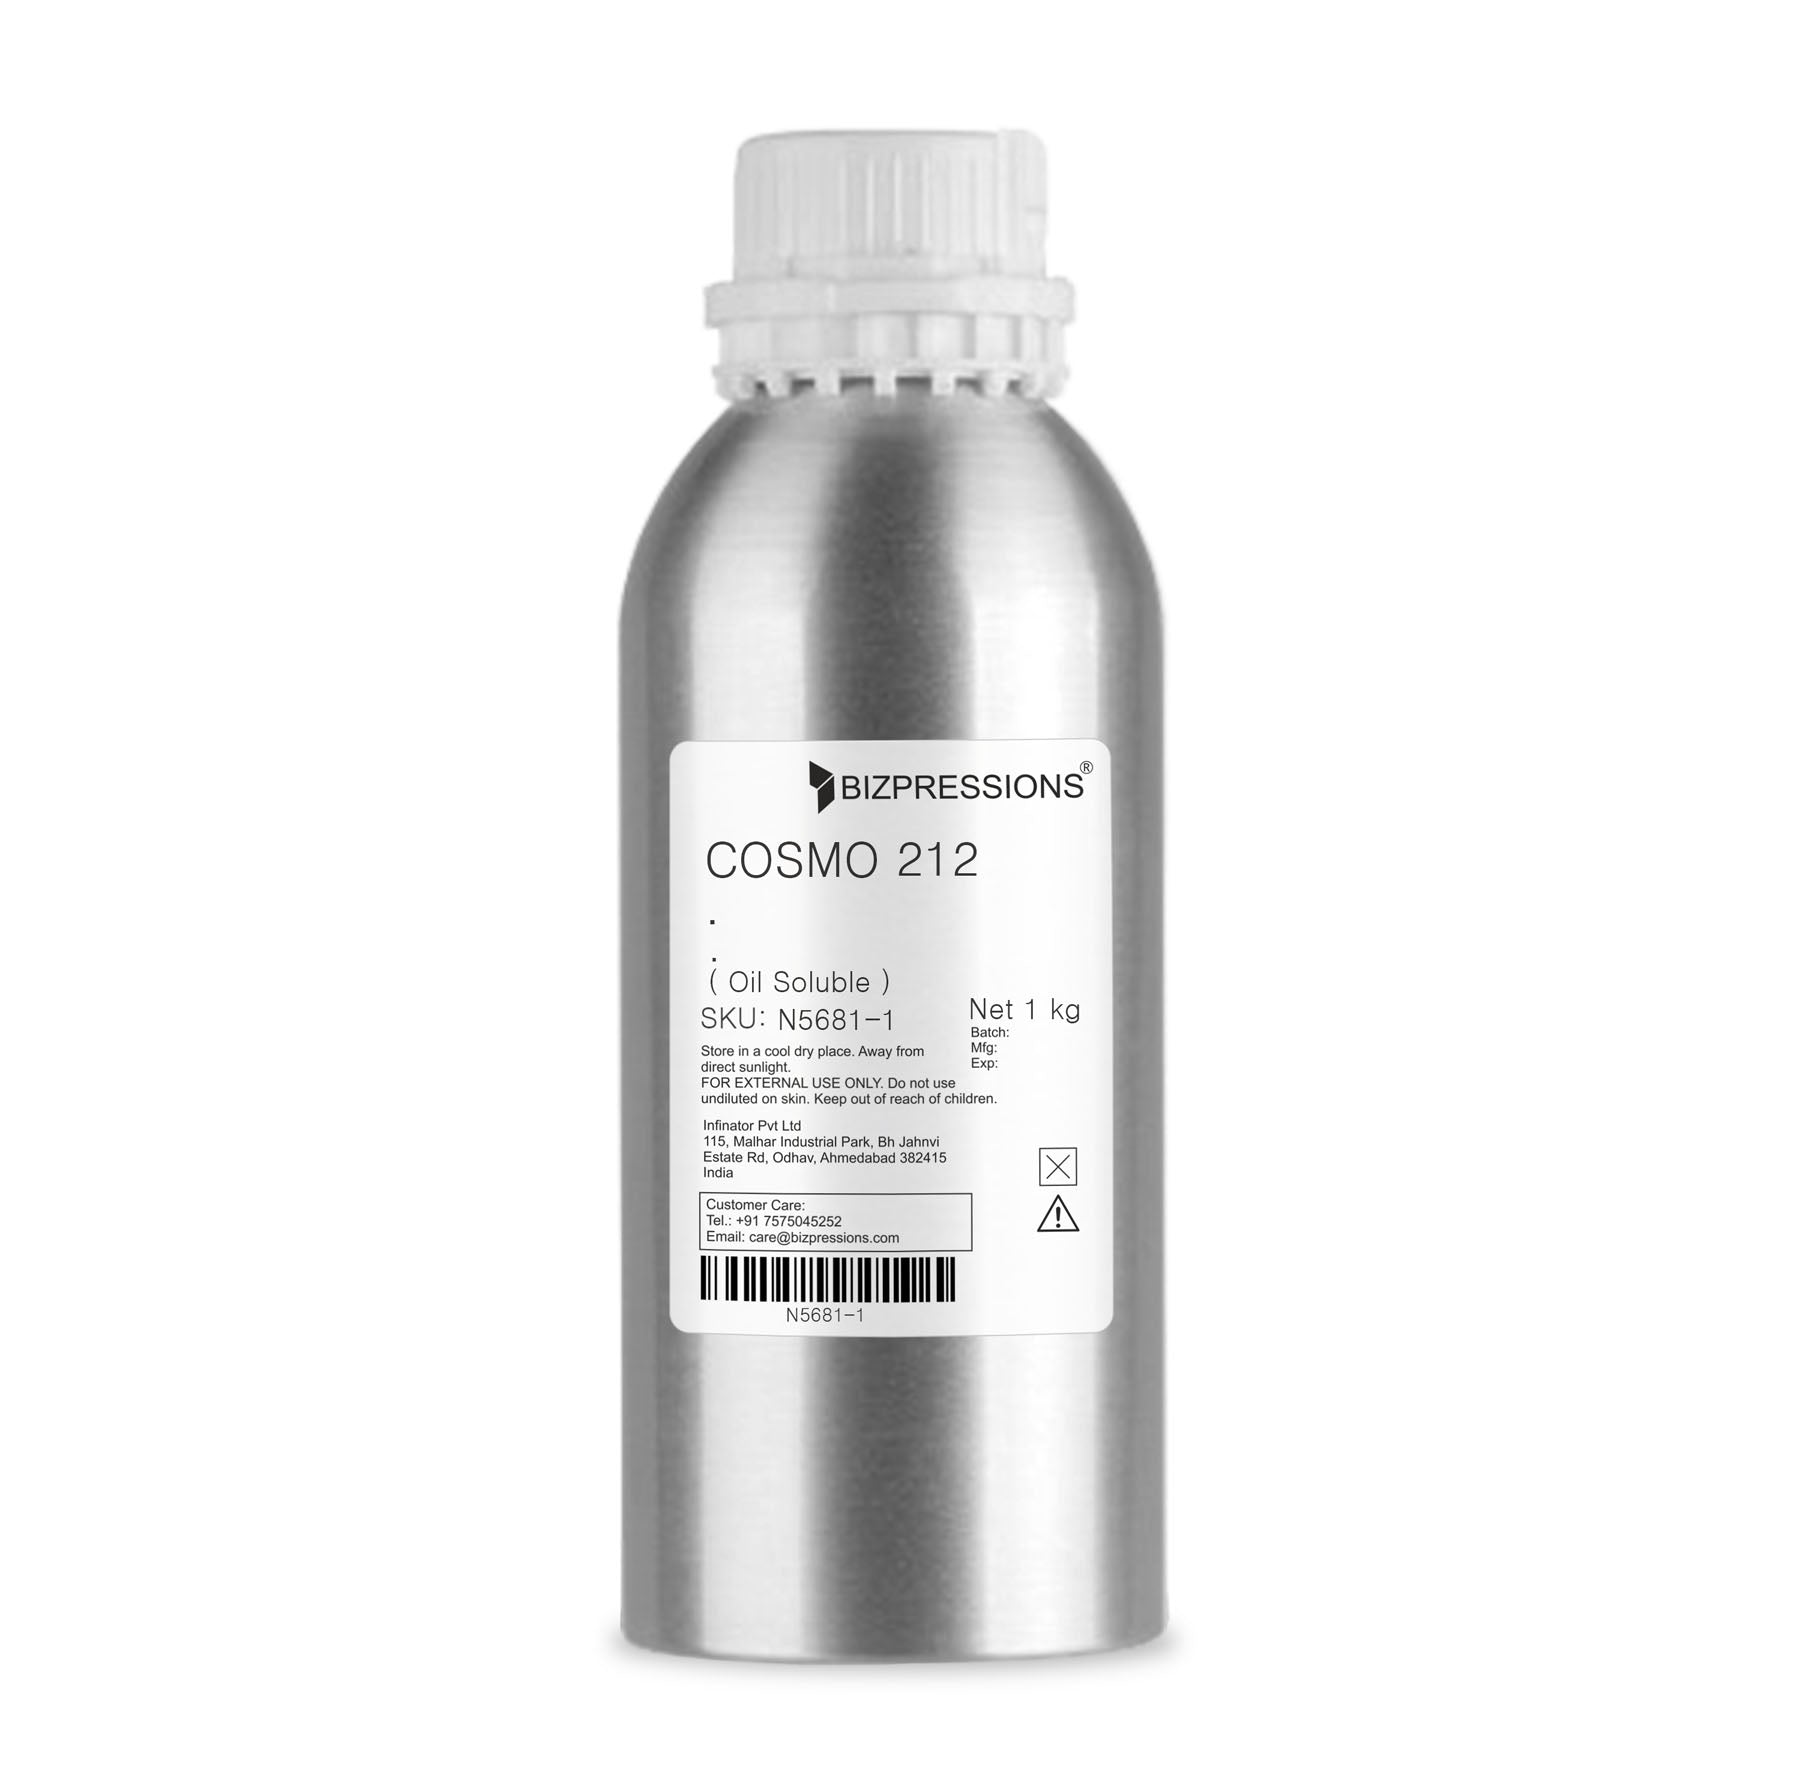 COSMO 212 - Fragrance ( Oil Soluble ) - 1 kg